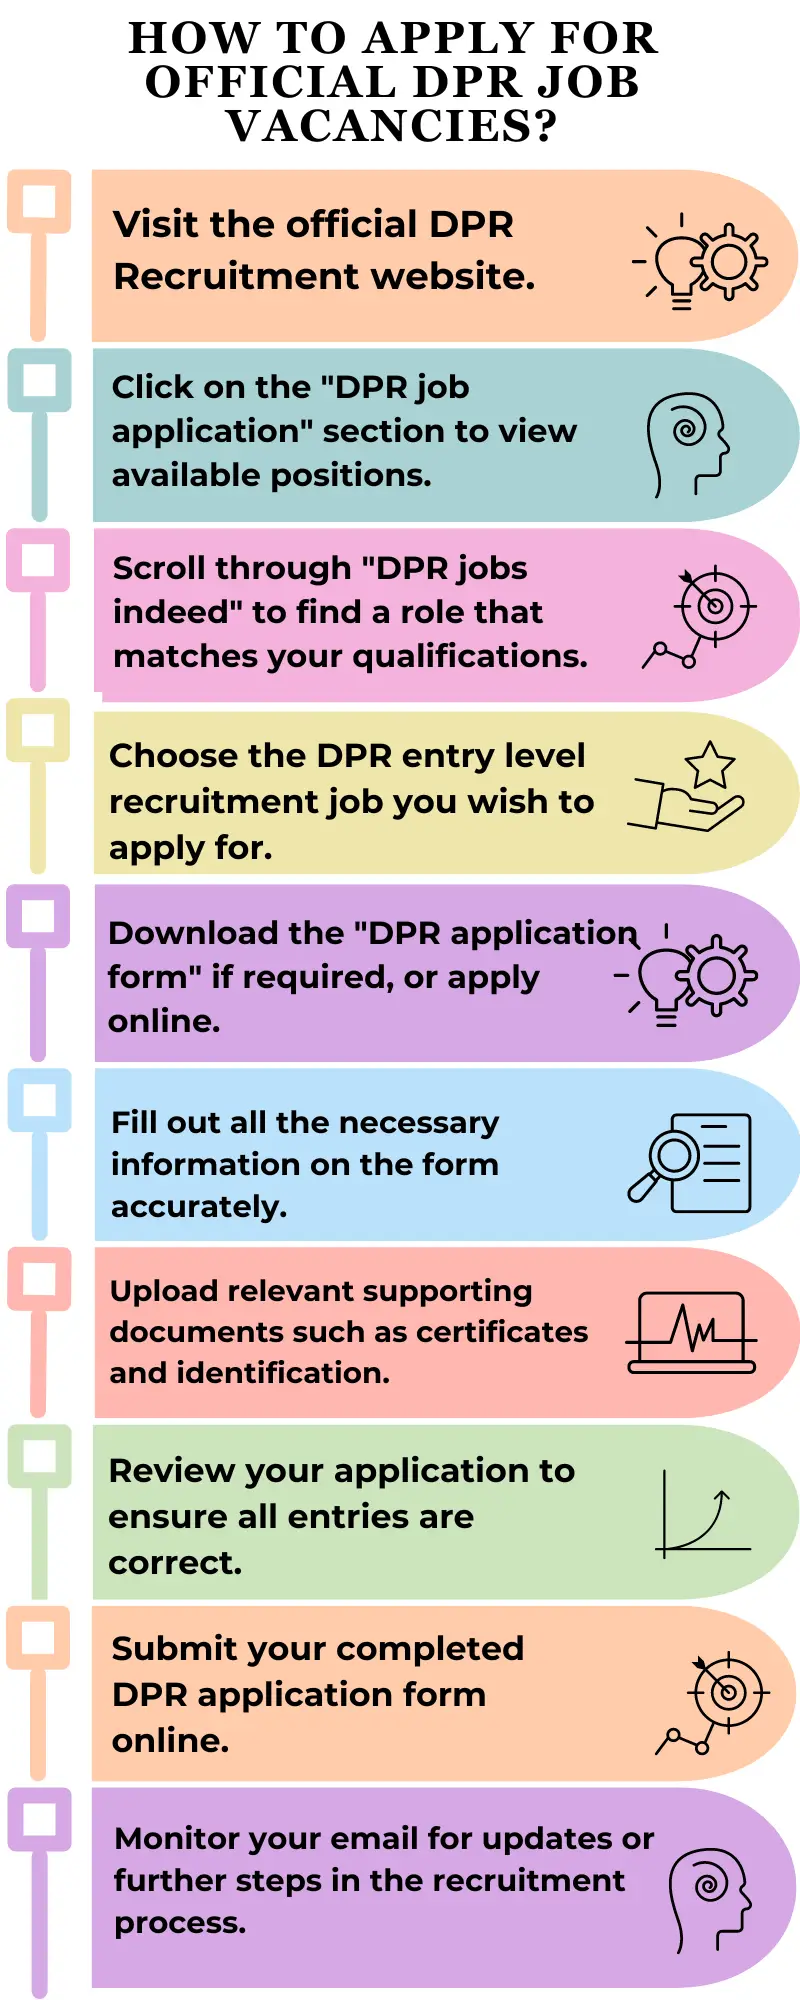 How to Apply for official DPR Job Vacancies?